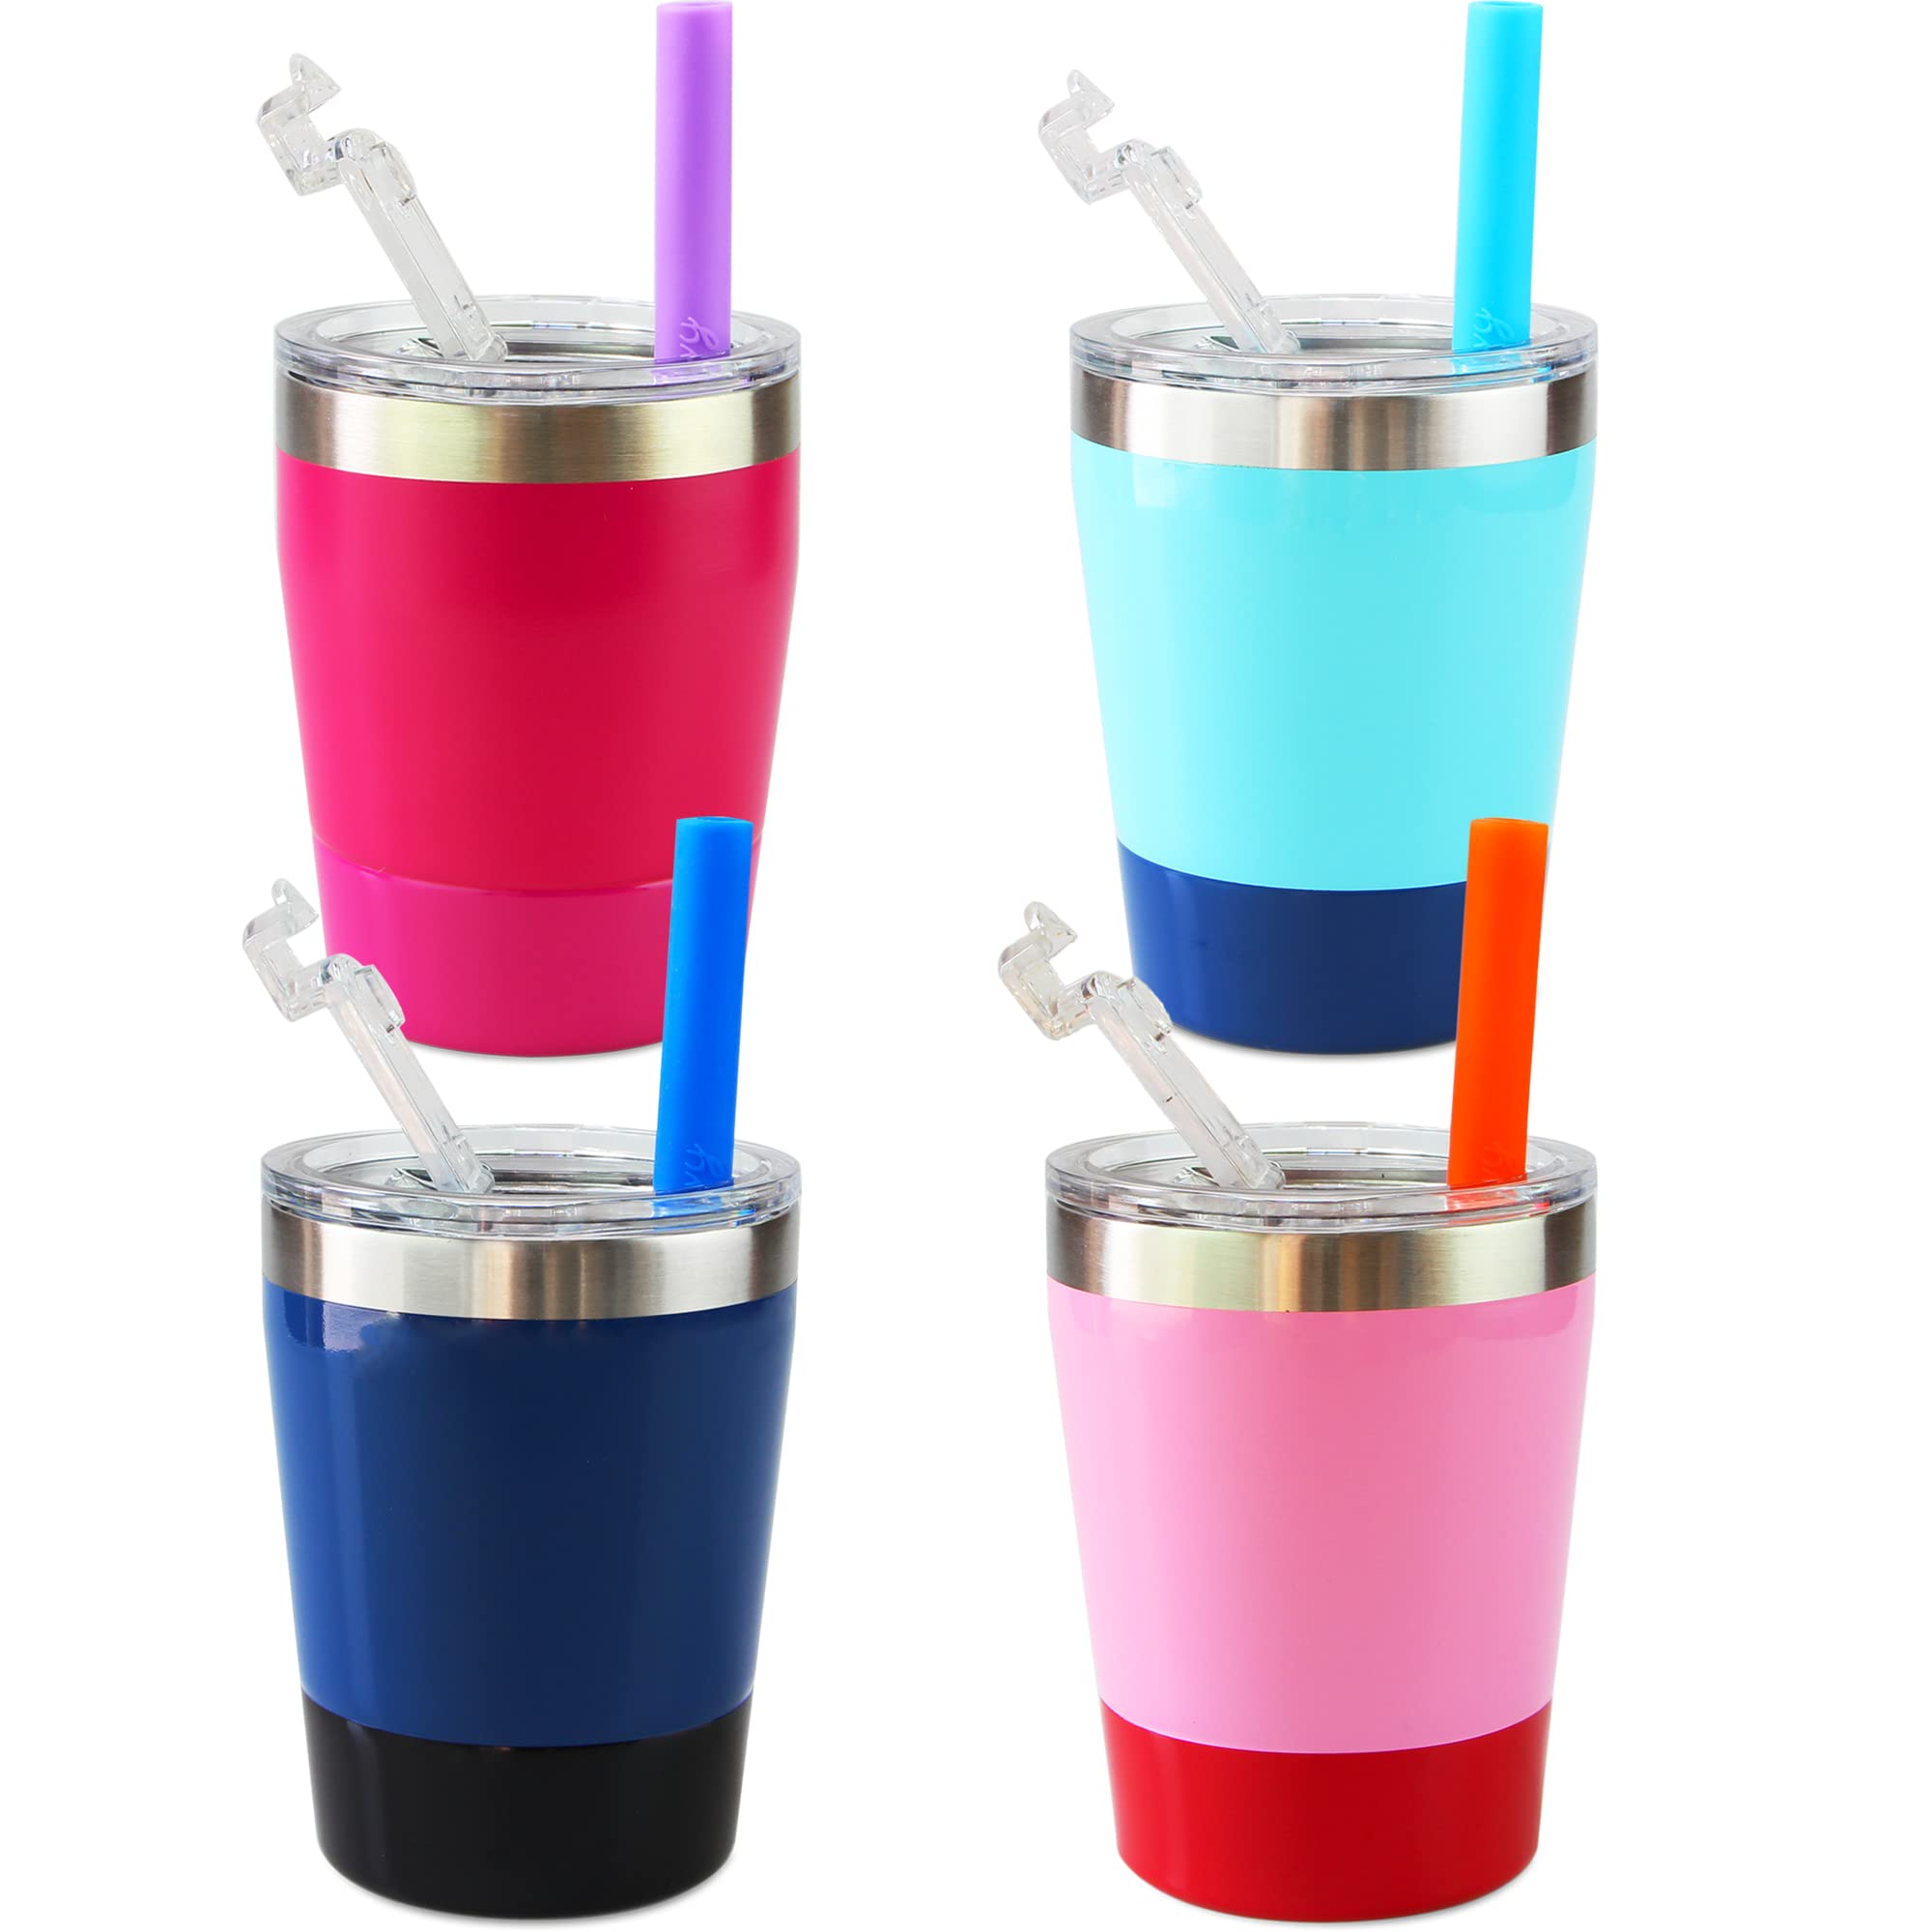 The Coolest Smoothie Straws  4 Colors + Straw Cleaner - Simple